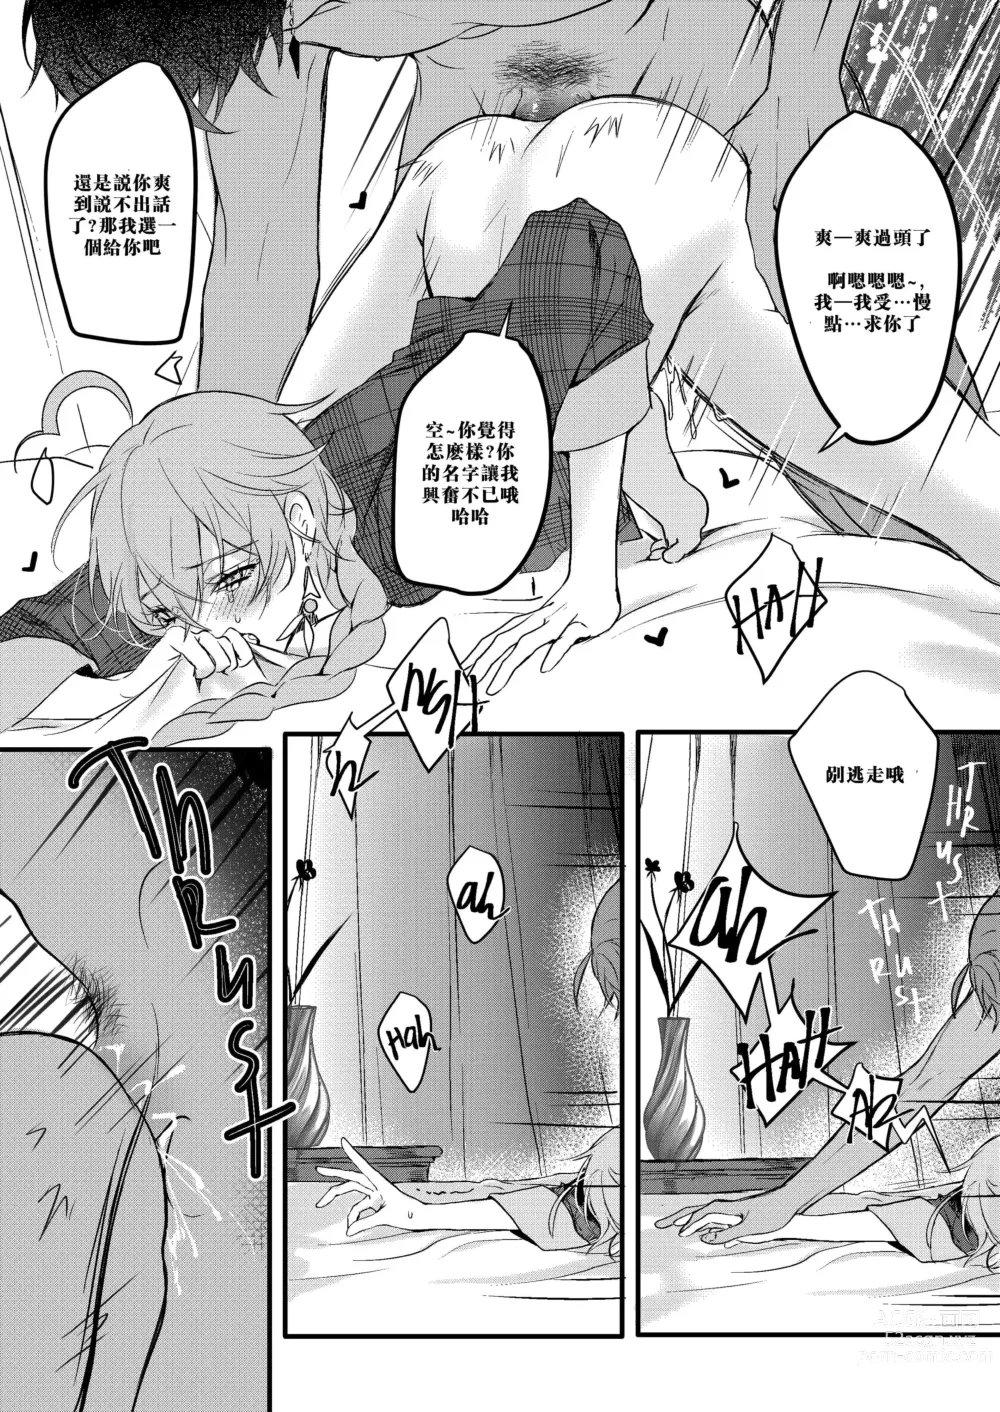 Page 28 of doujinshi Sweet Fever Treatment